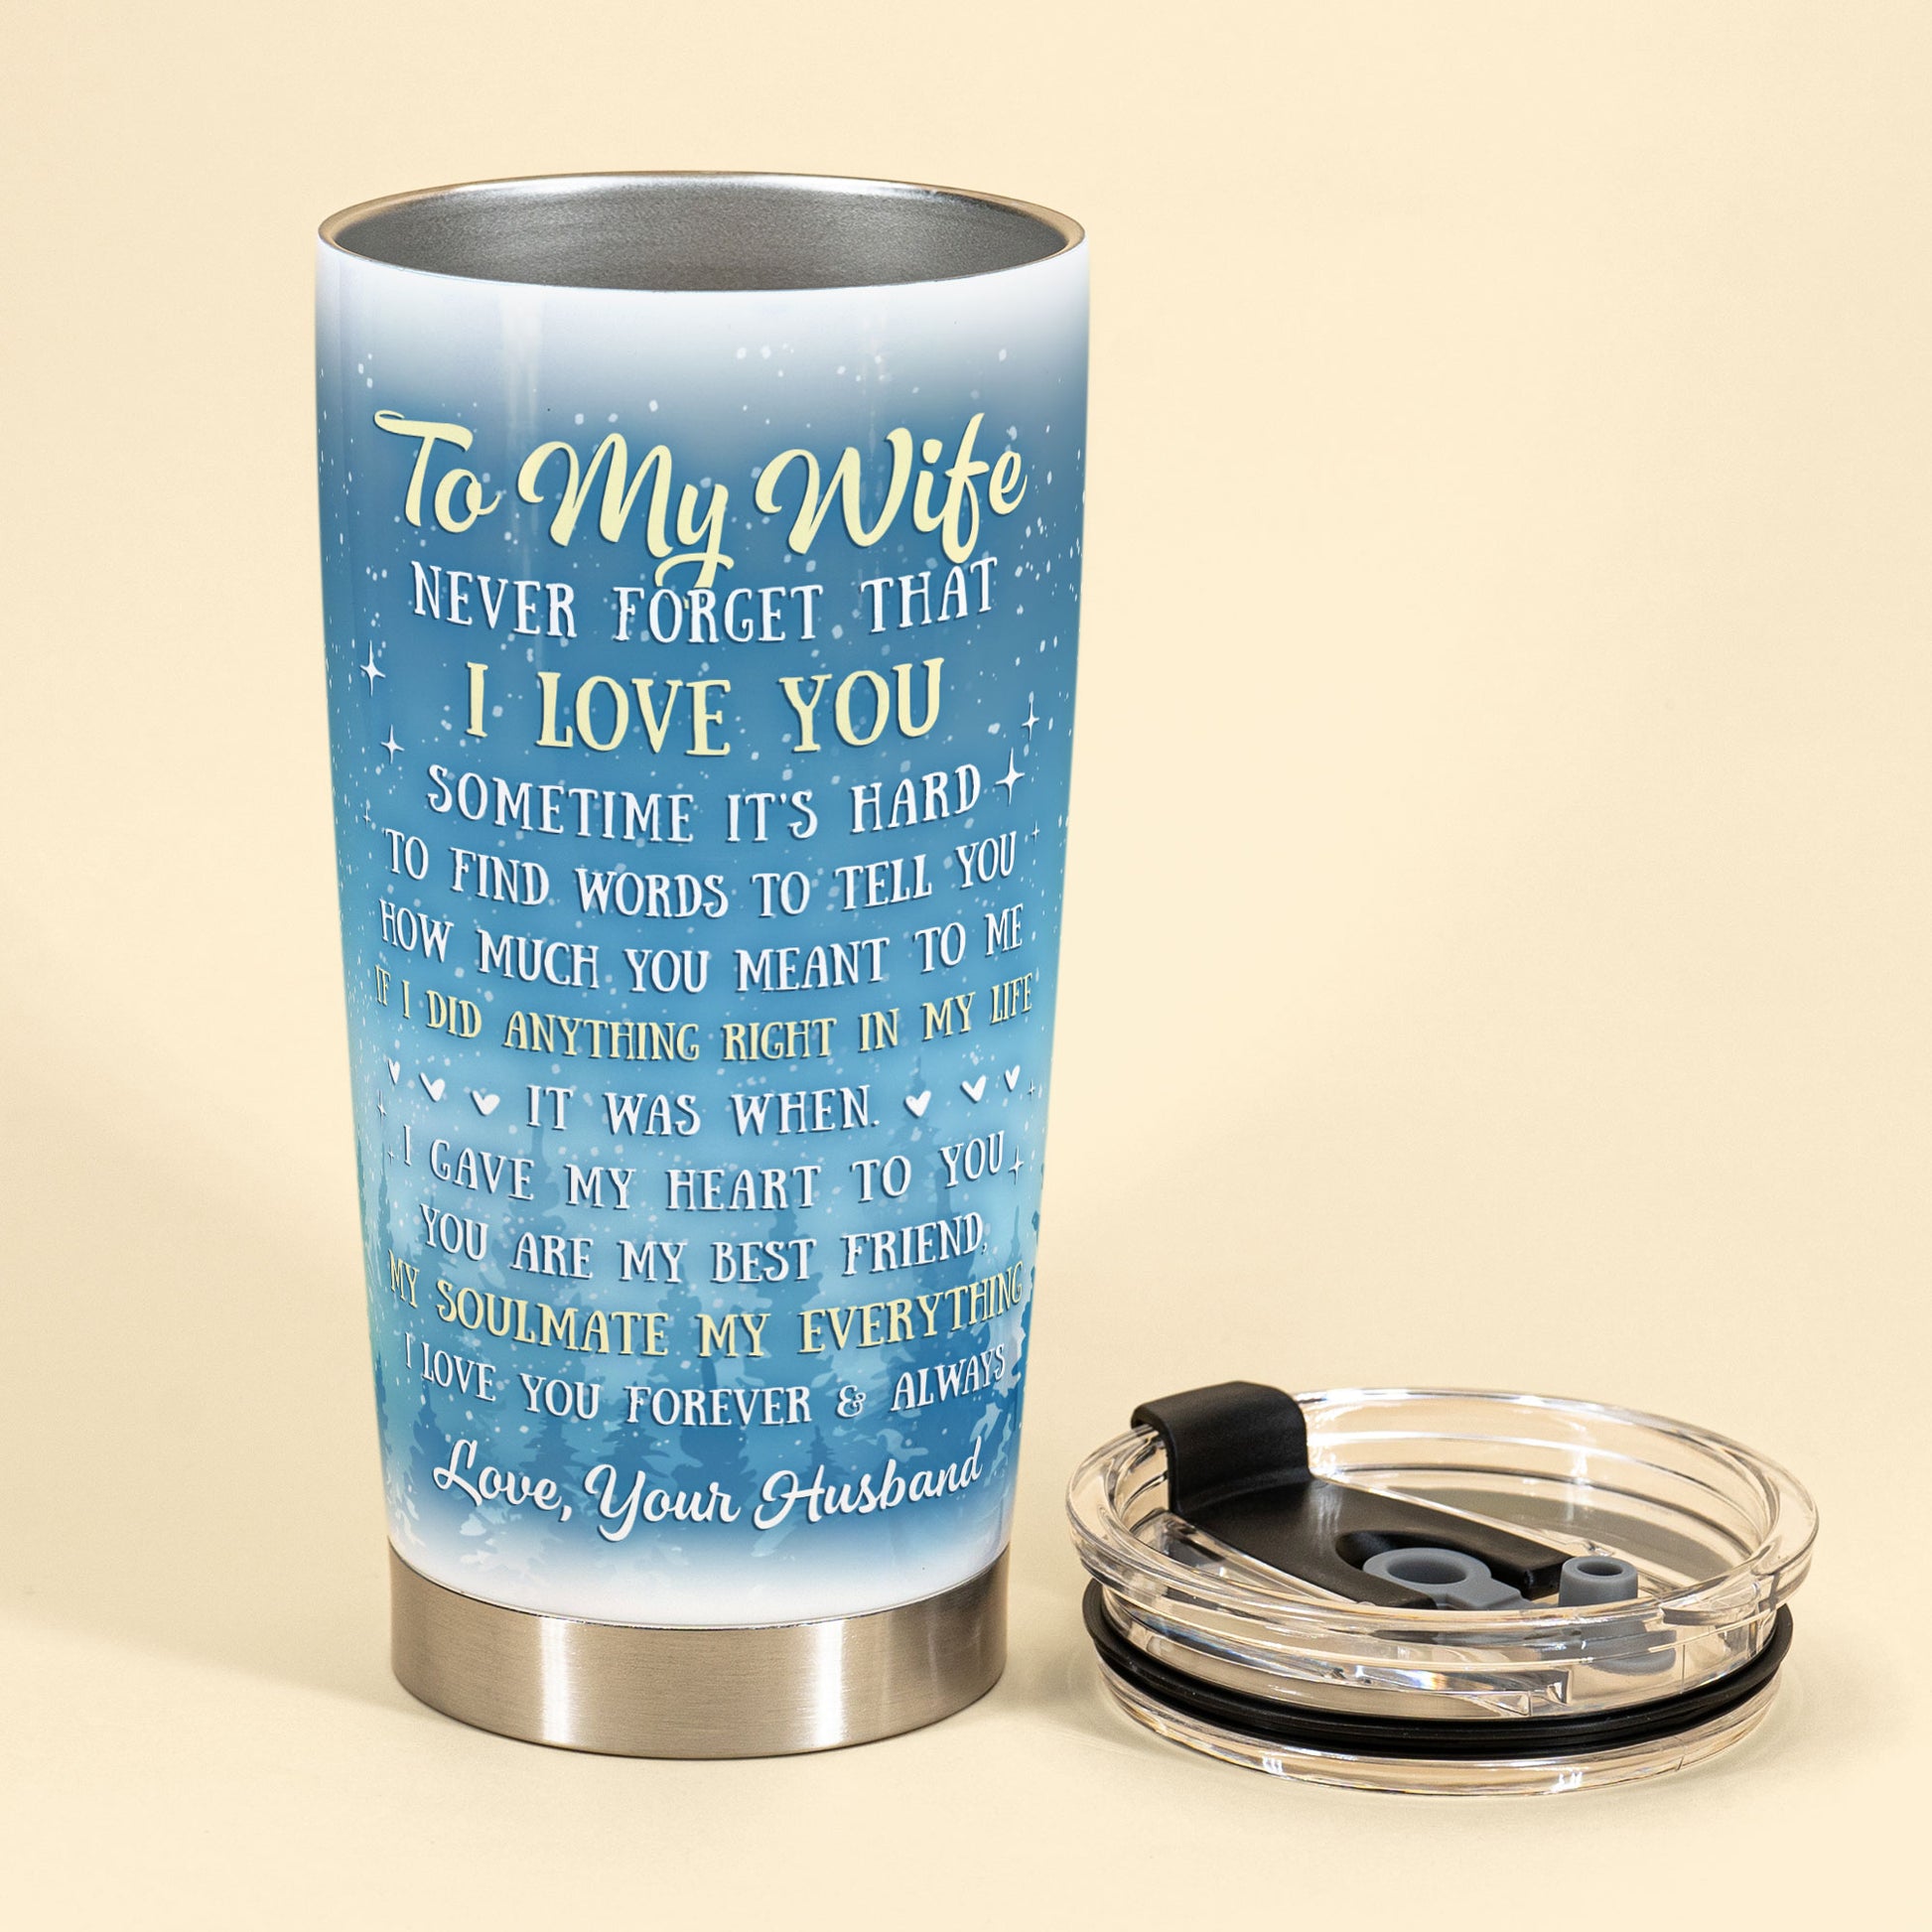 I Love You Forever And Always - Personalized Tumbler Cup - Anniversary , Valentine's Day Gift For Wife